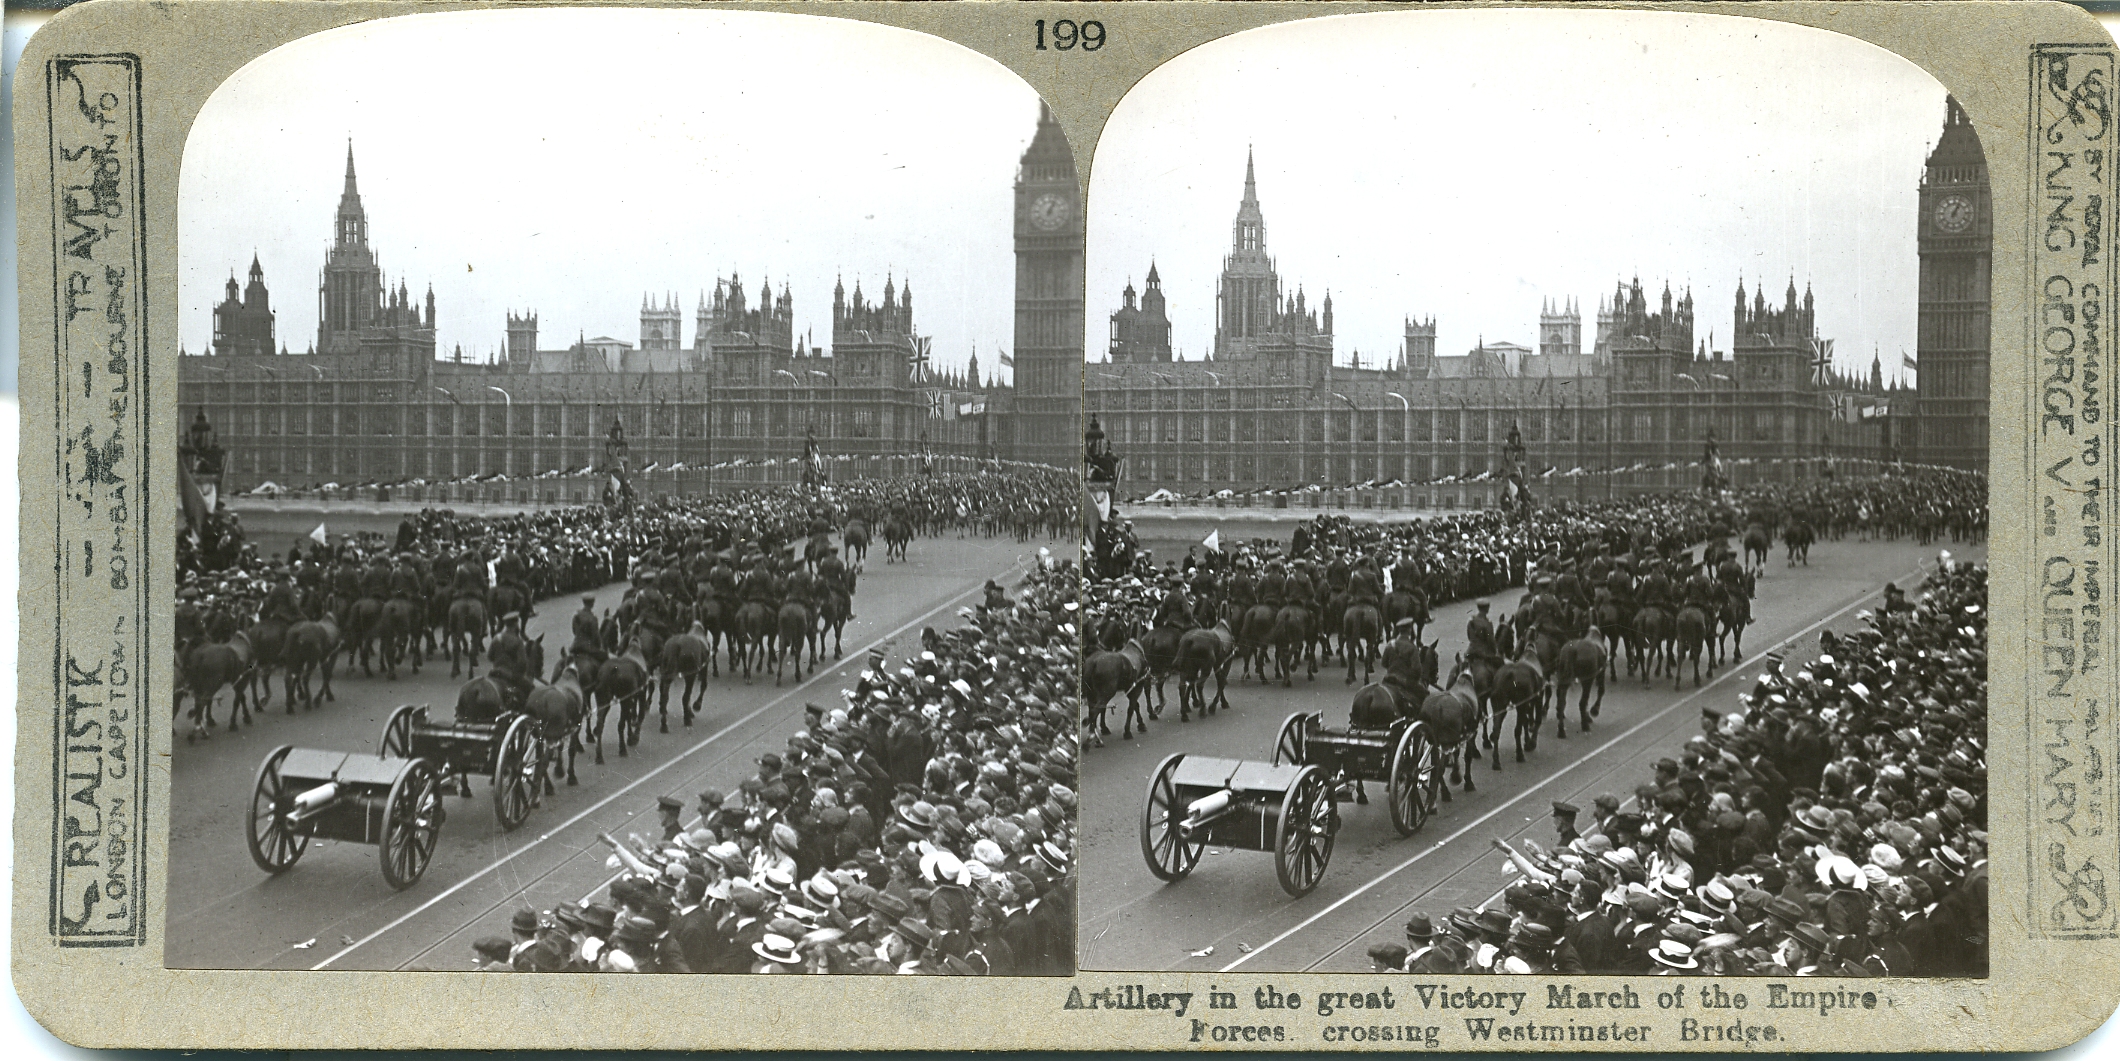 Artillery in the great Victory March of the Empire Forces crossing Westminster Bridge